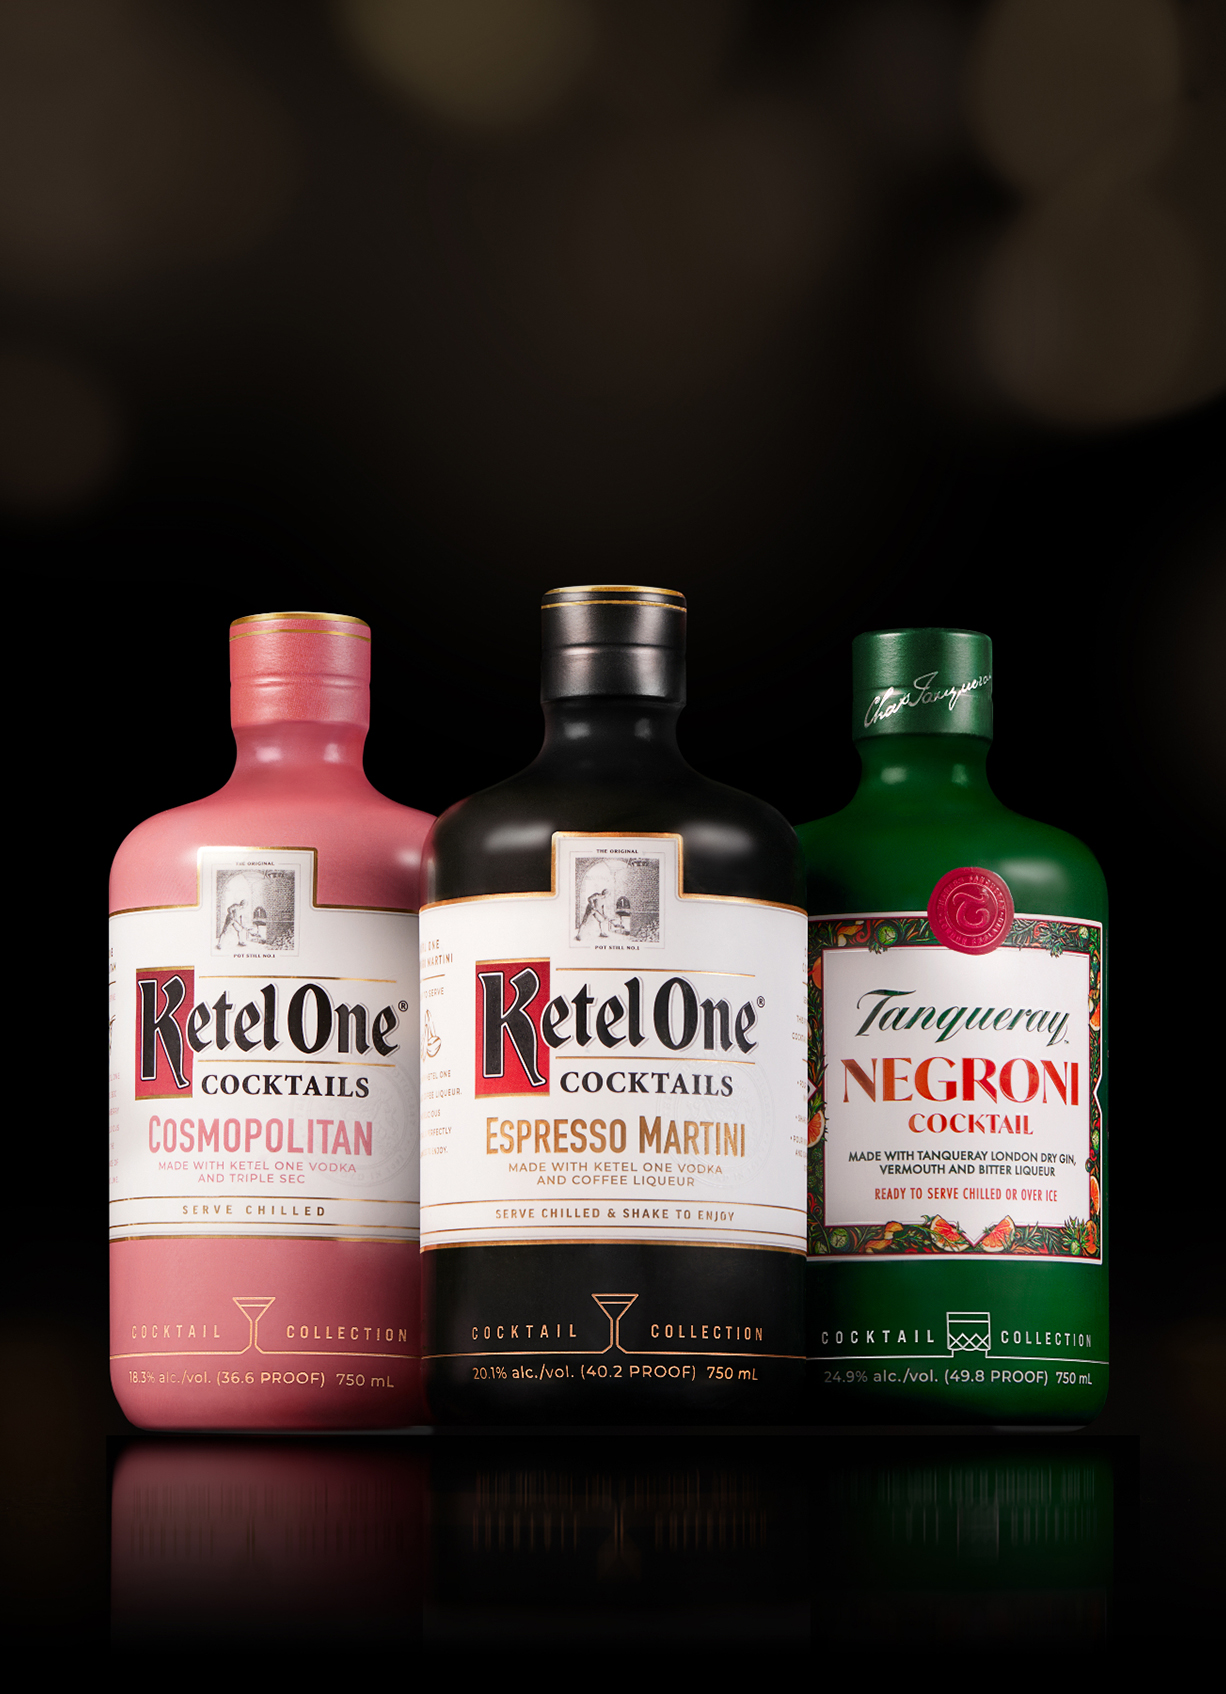 The Cocktail Collection: Ketel One Cosmopolitan, Ketel One Espresso Martini and Tanqueray Negroni